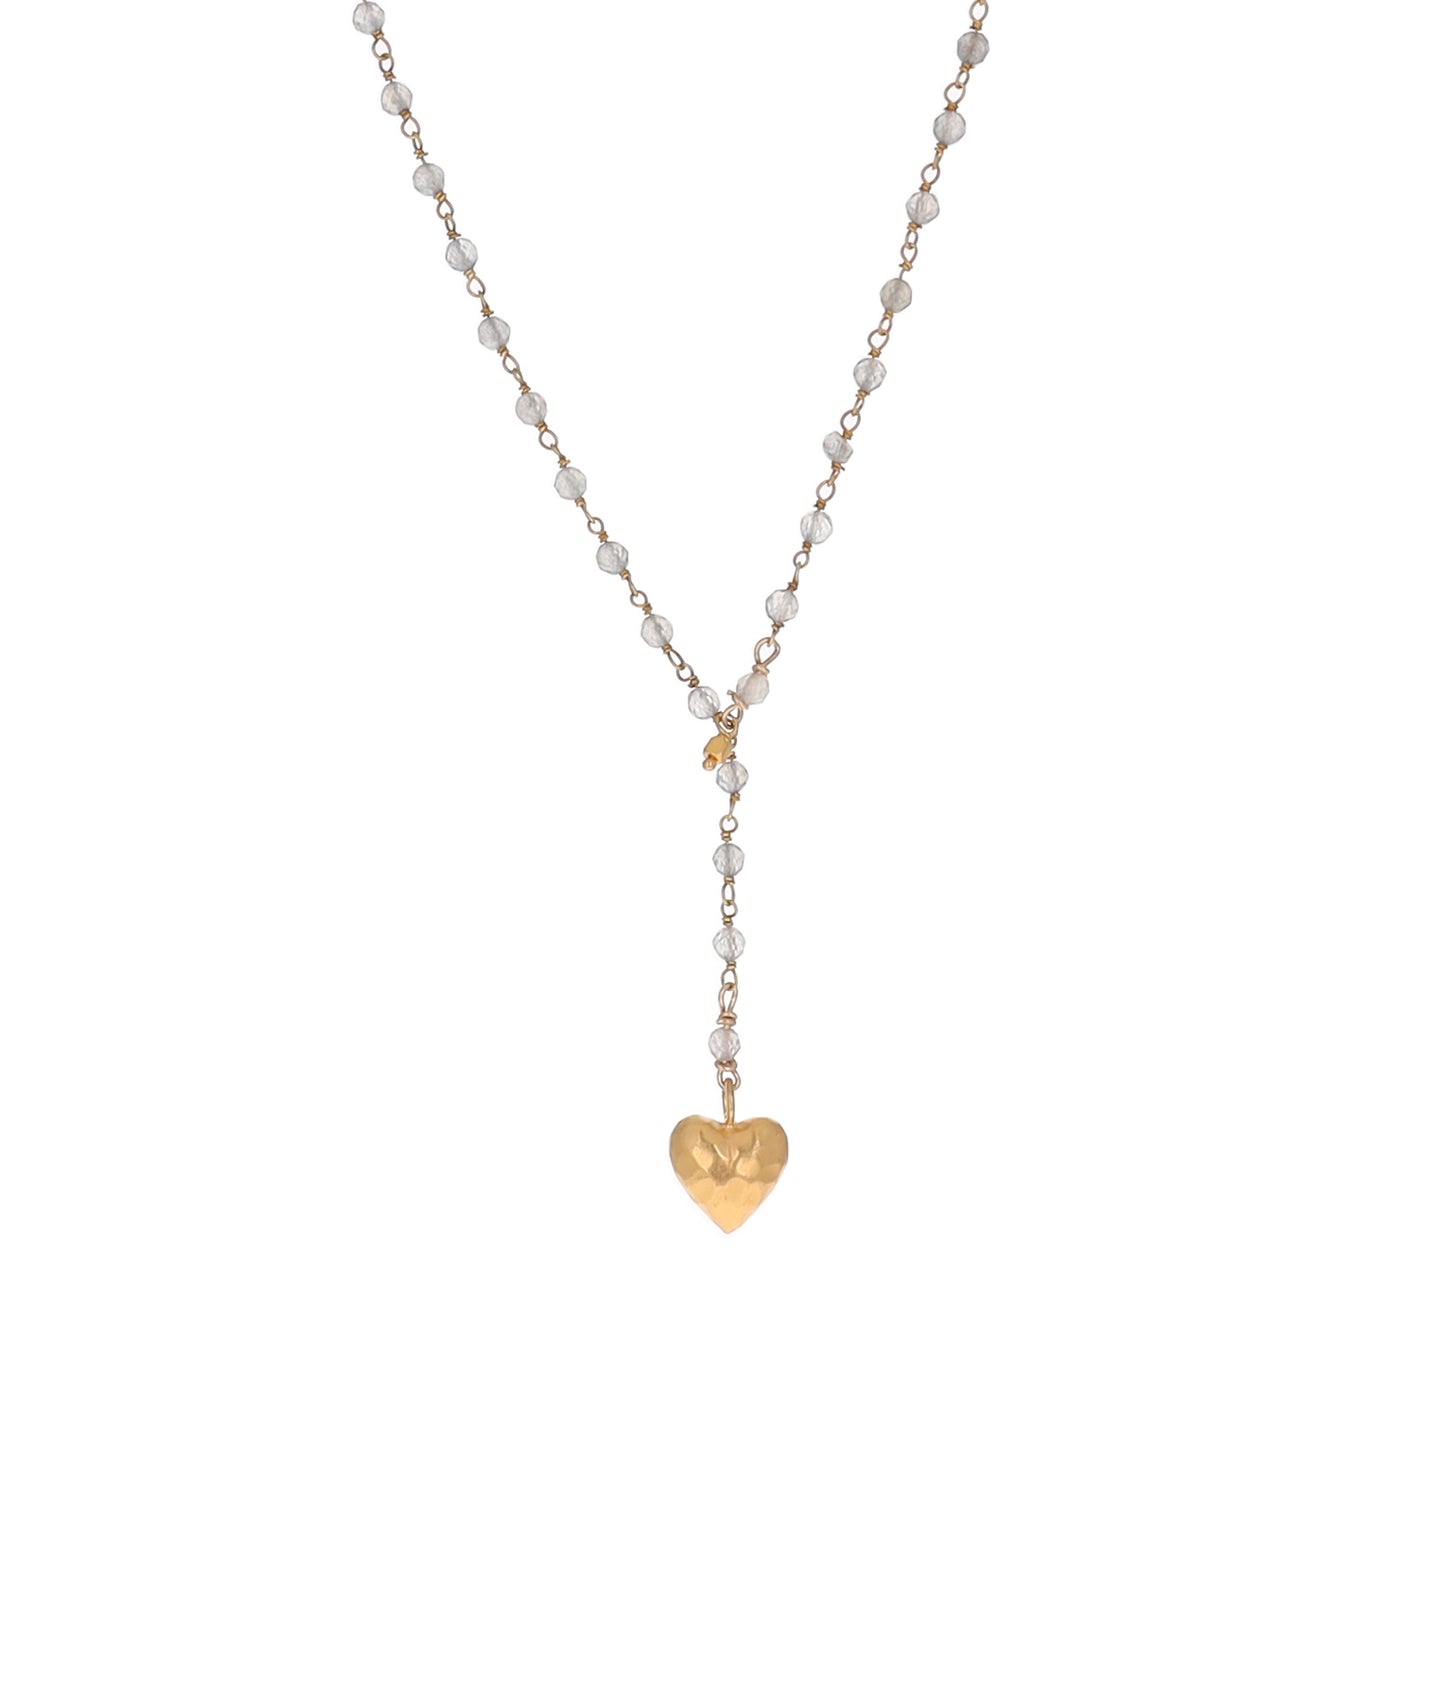 Puffy Heart Charm Necklace